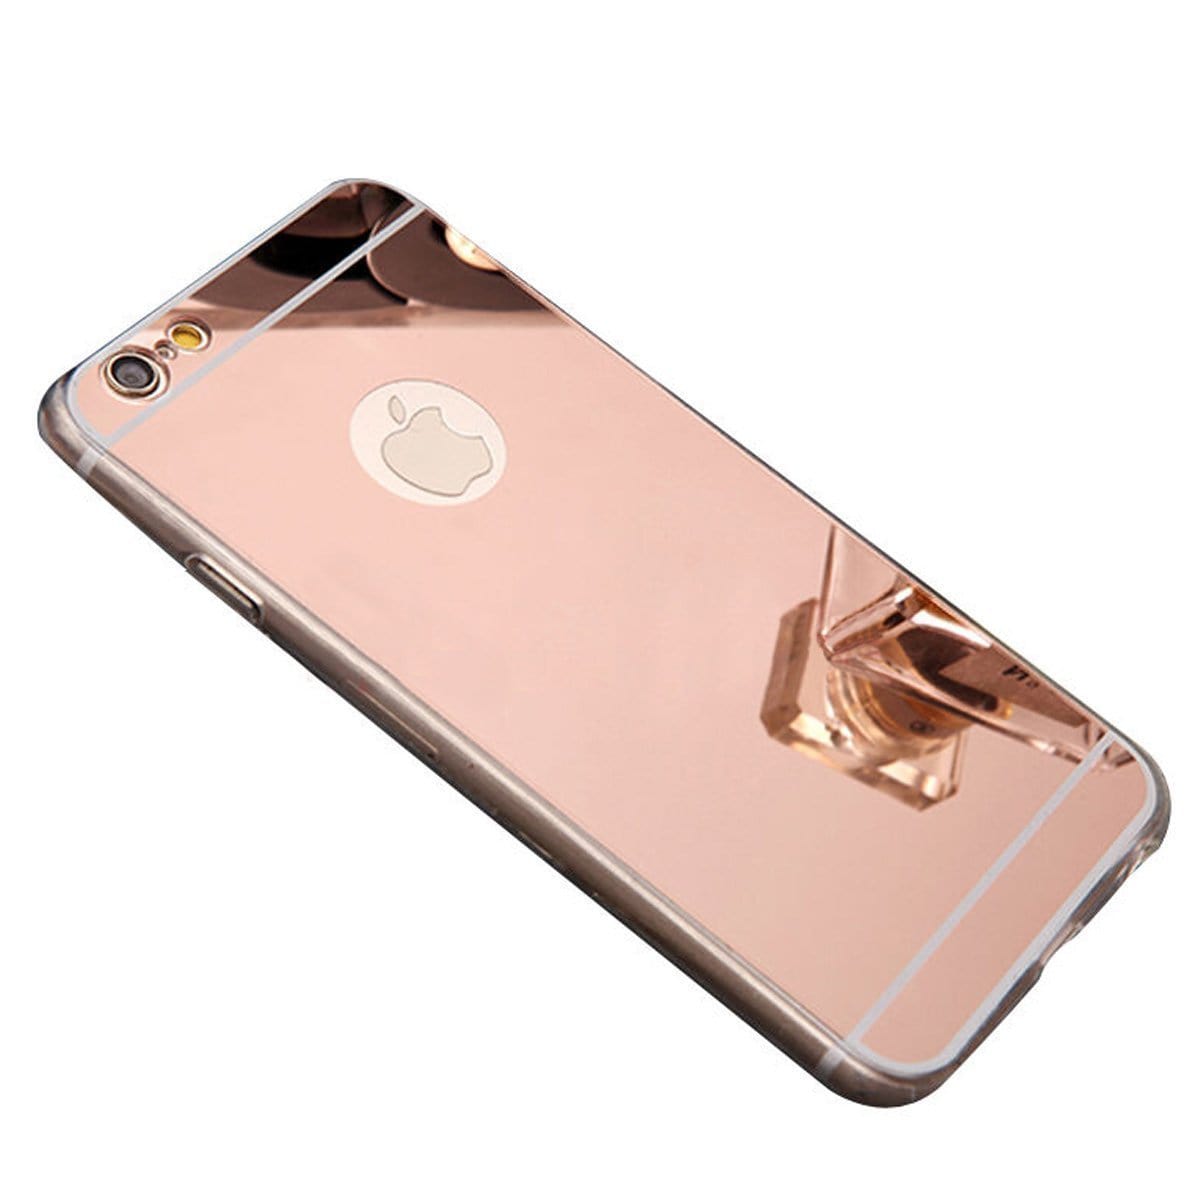 iPhone 6+/7+/8+ Ultra Slim Flexible Shockproof Mirror Reflective Case (Gold/Rose Gold/Silver)